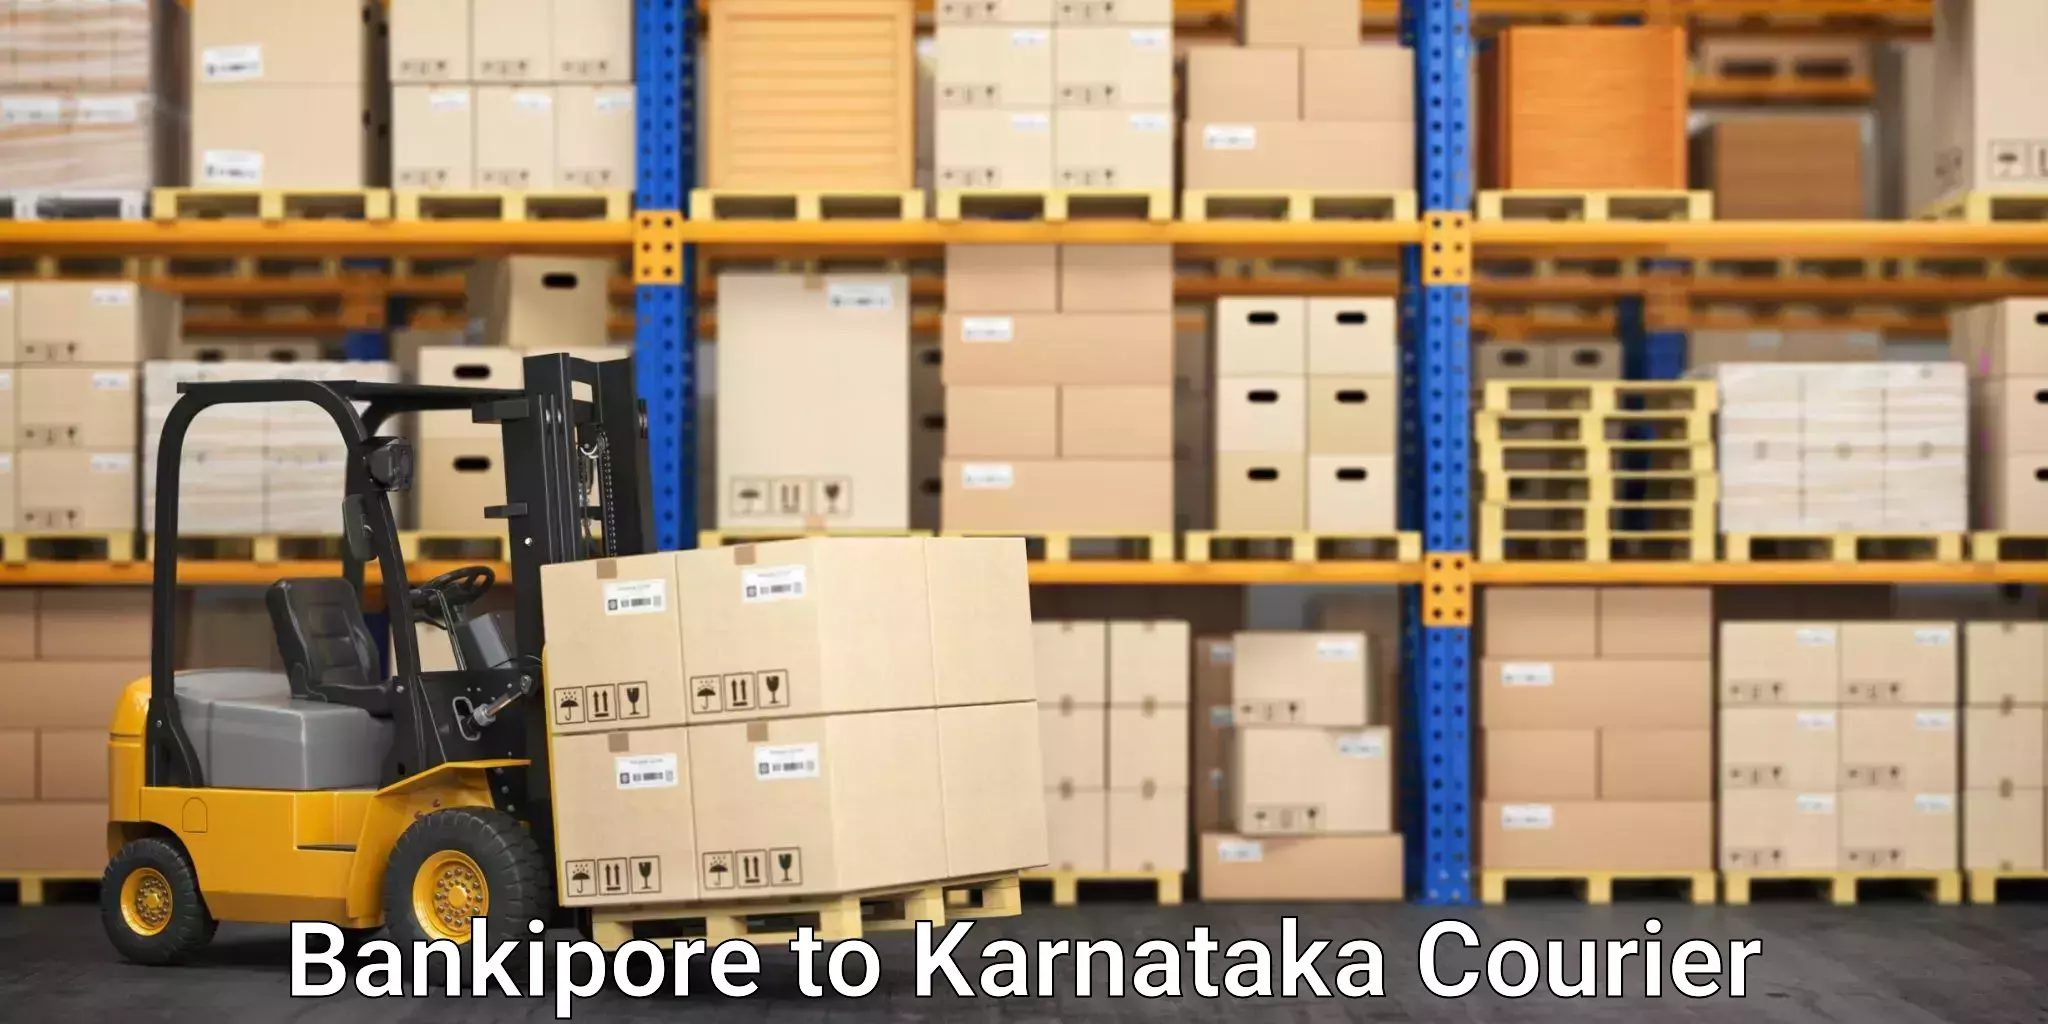 Quality relocation assistance Bankipore to Mandya